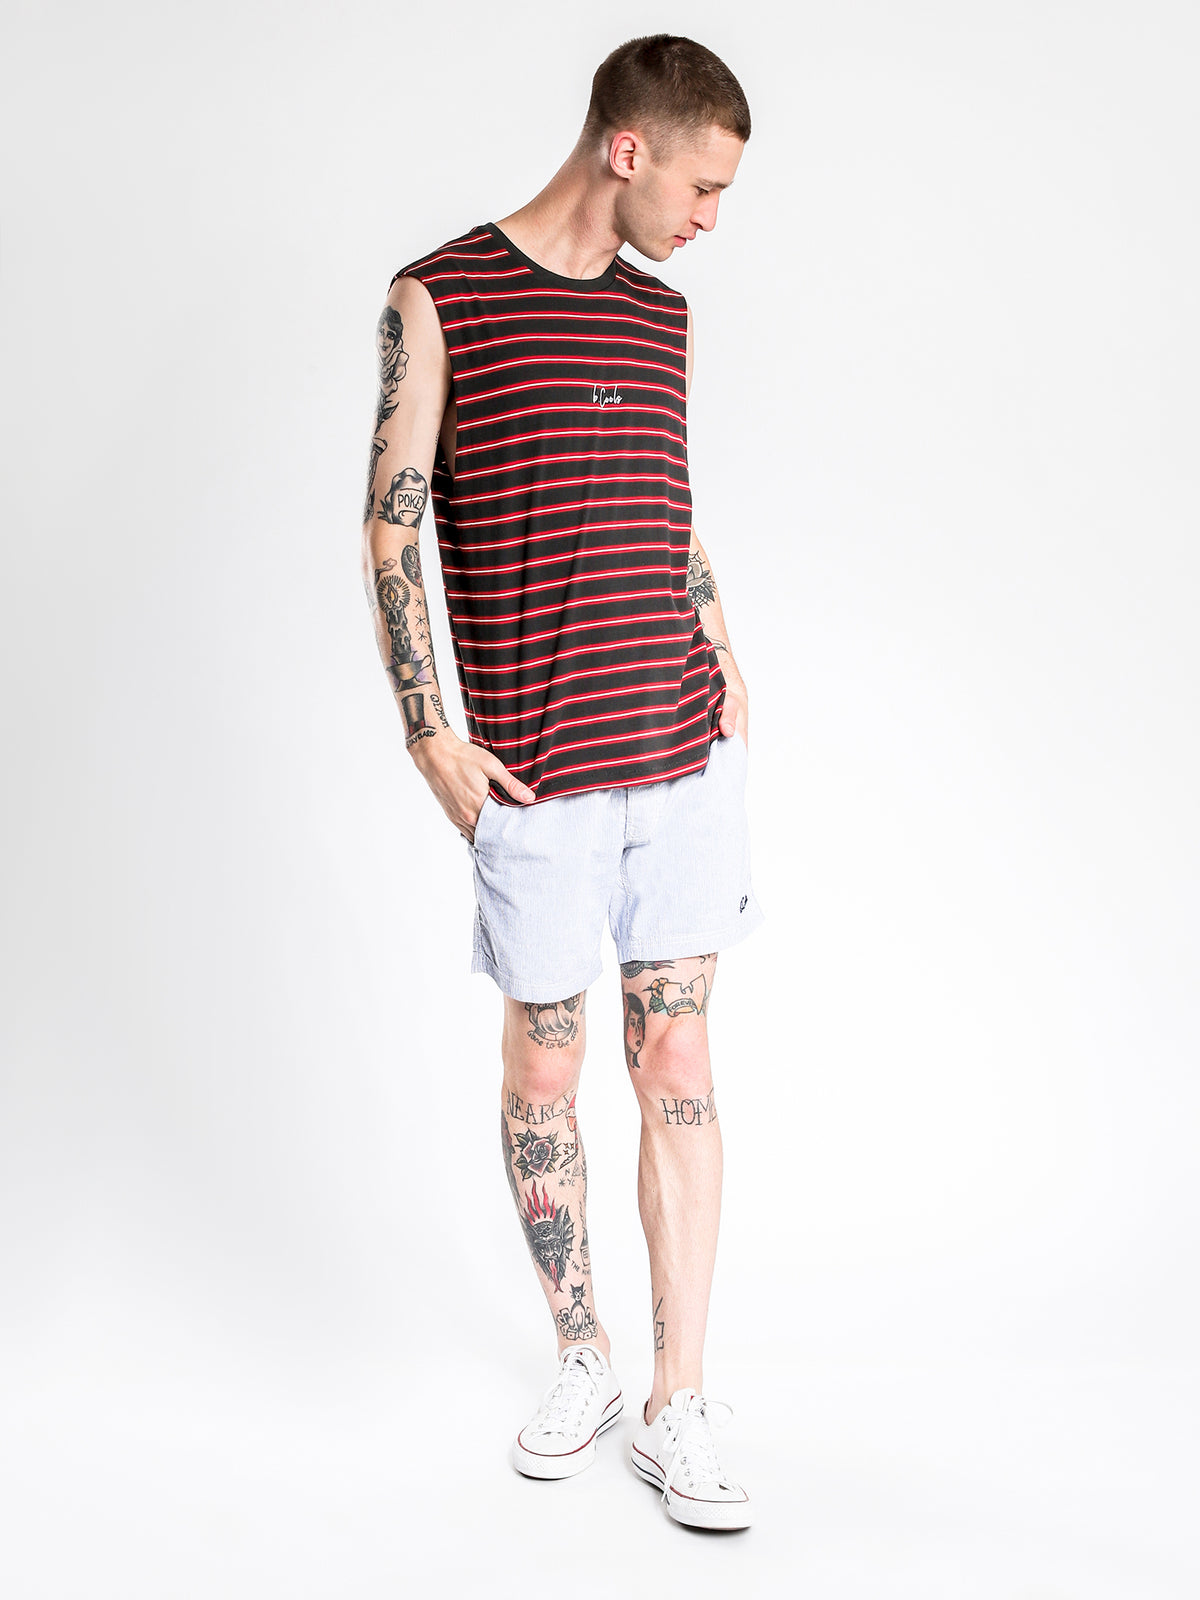 B Cools Muscle T-Shirt in Black &amp; Red Stripe